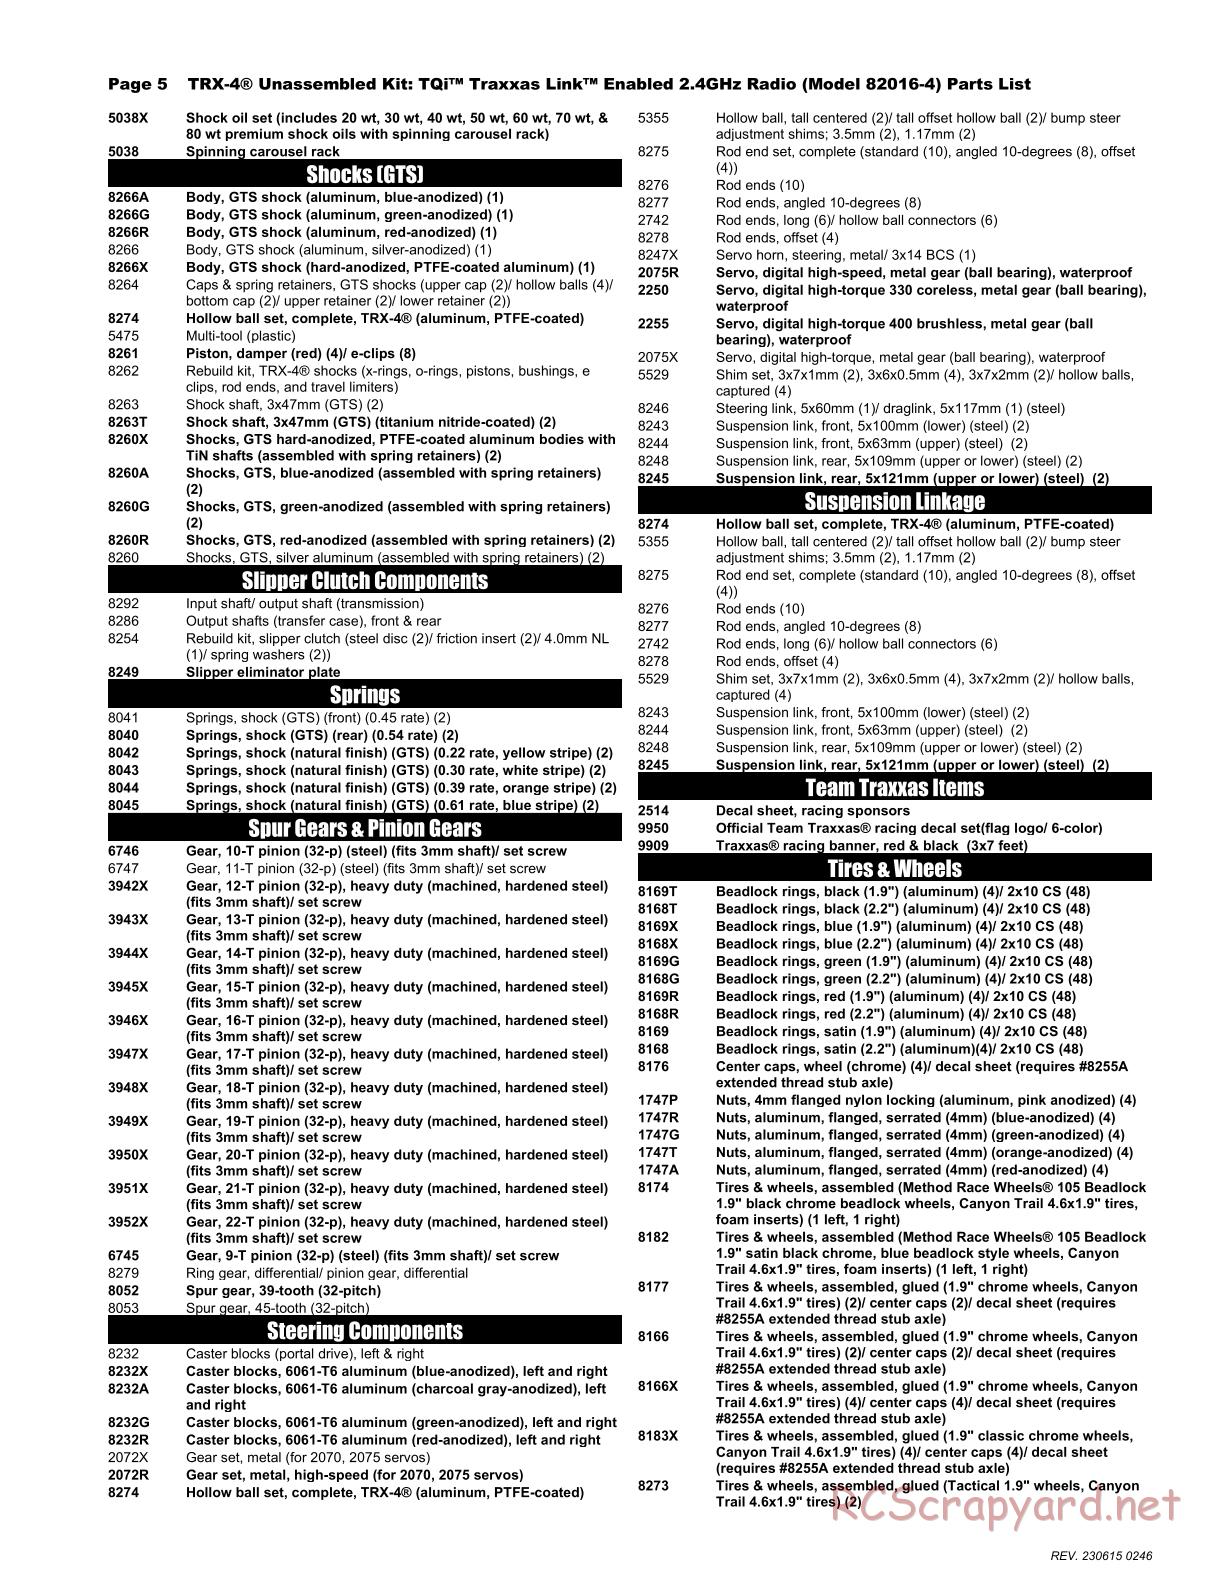 Traxxas - TRX-4 Chassis (2018) - Parts List - Page 5